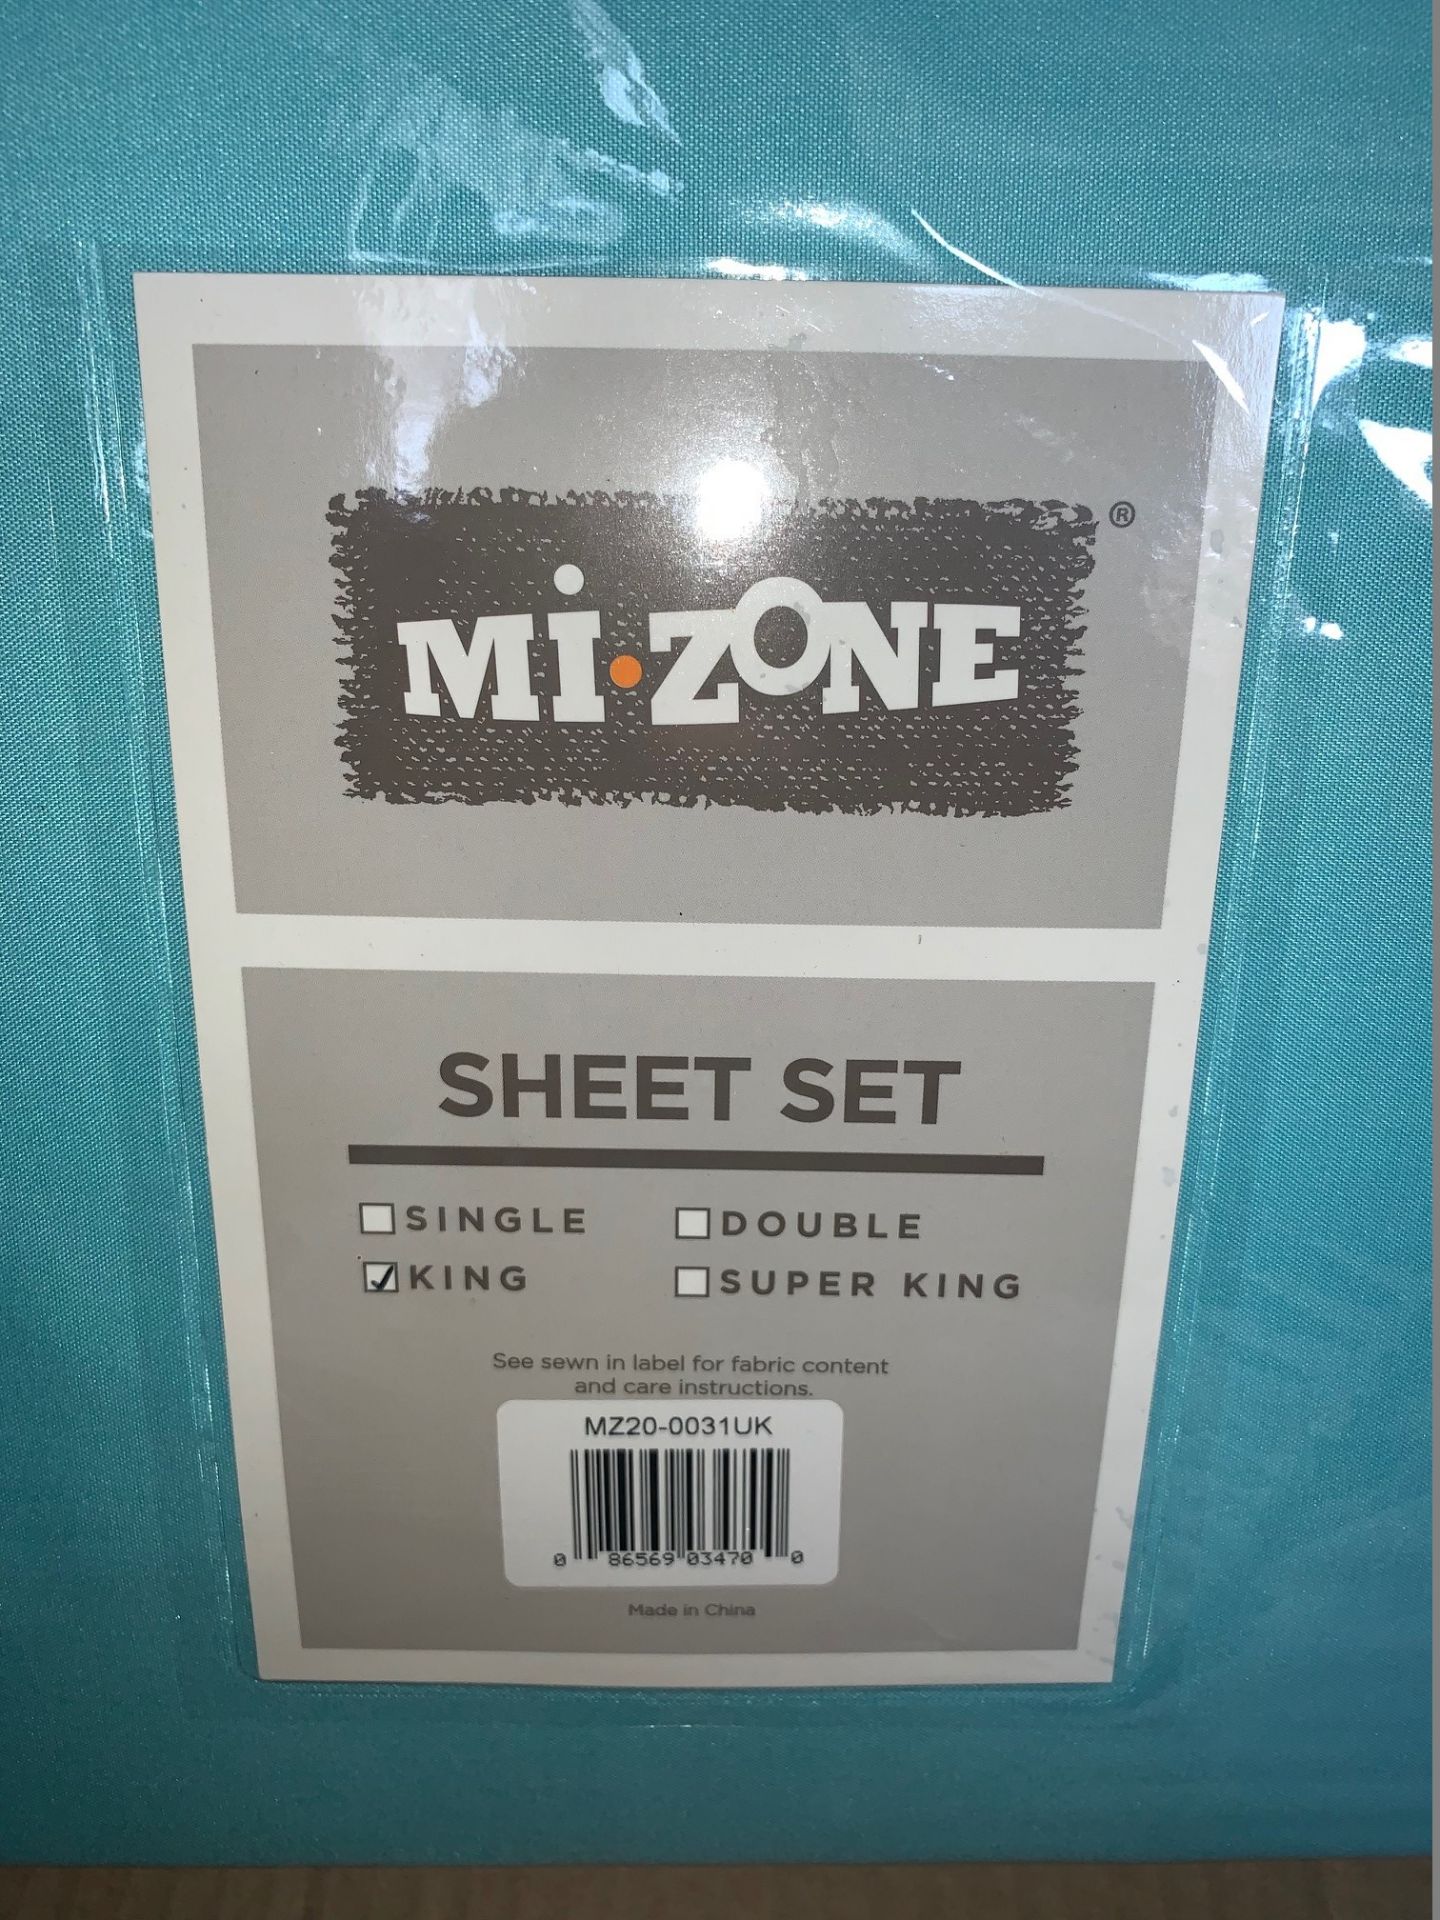 2 x Mi-Zone King Size Sheet Sets Teal - Includes Fitted Sheet, Flat Sheet and Pillowcases - - Image 2 of 2